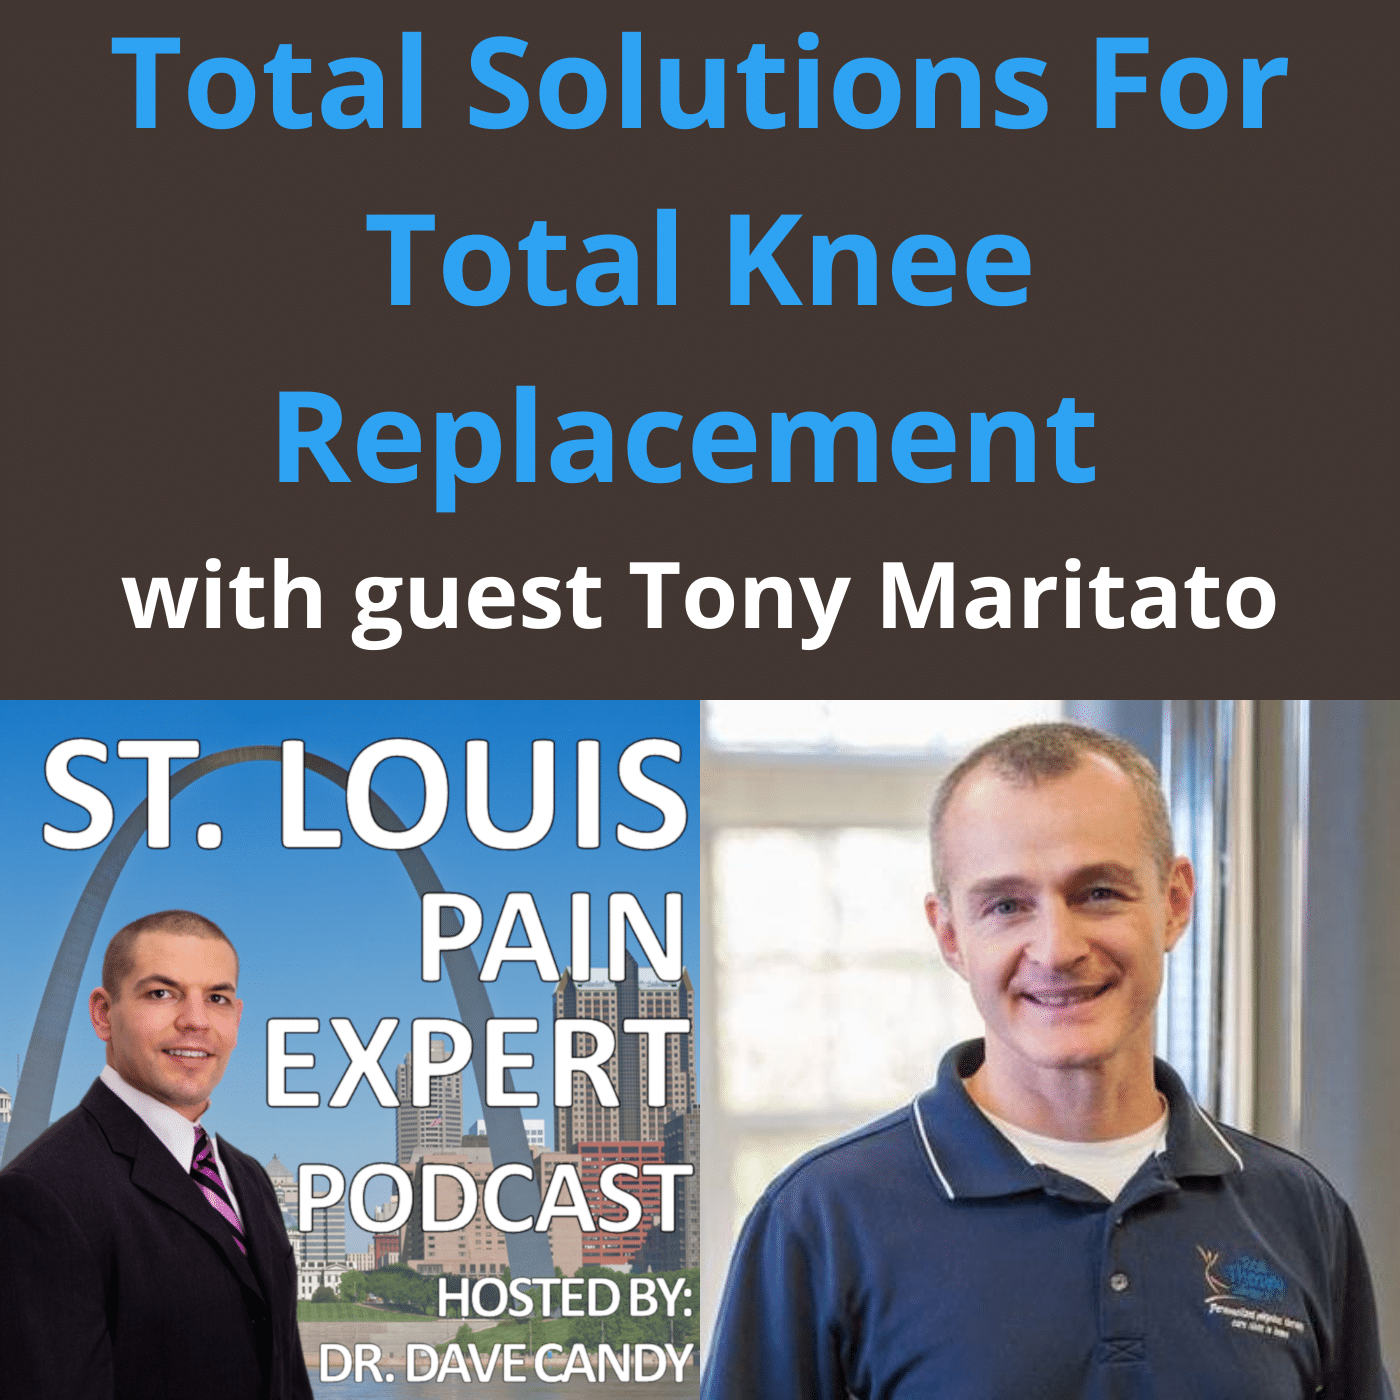 St. Louis Pain Expert Podcast Episode 51 - Total Solutions For Total Knee Replacement with guest Tony Maritato